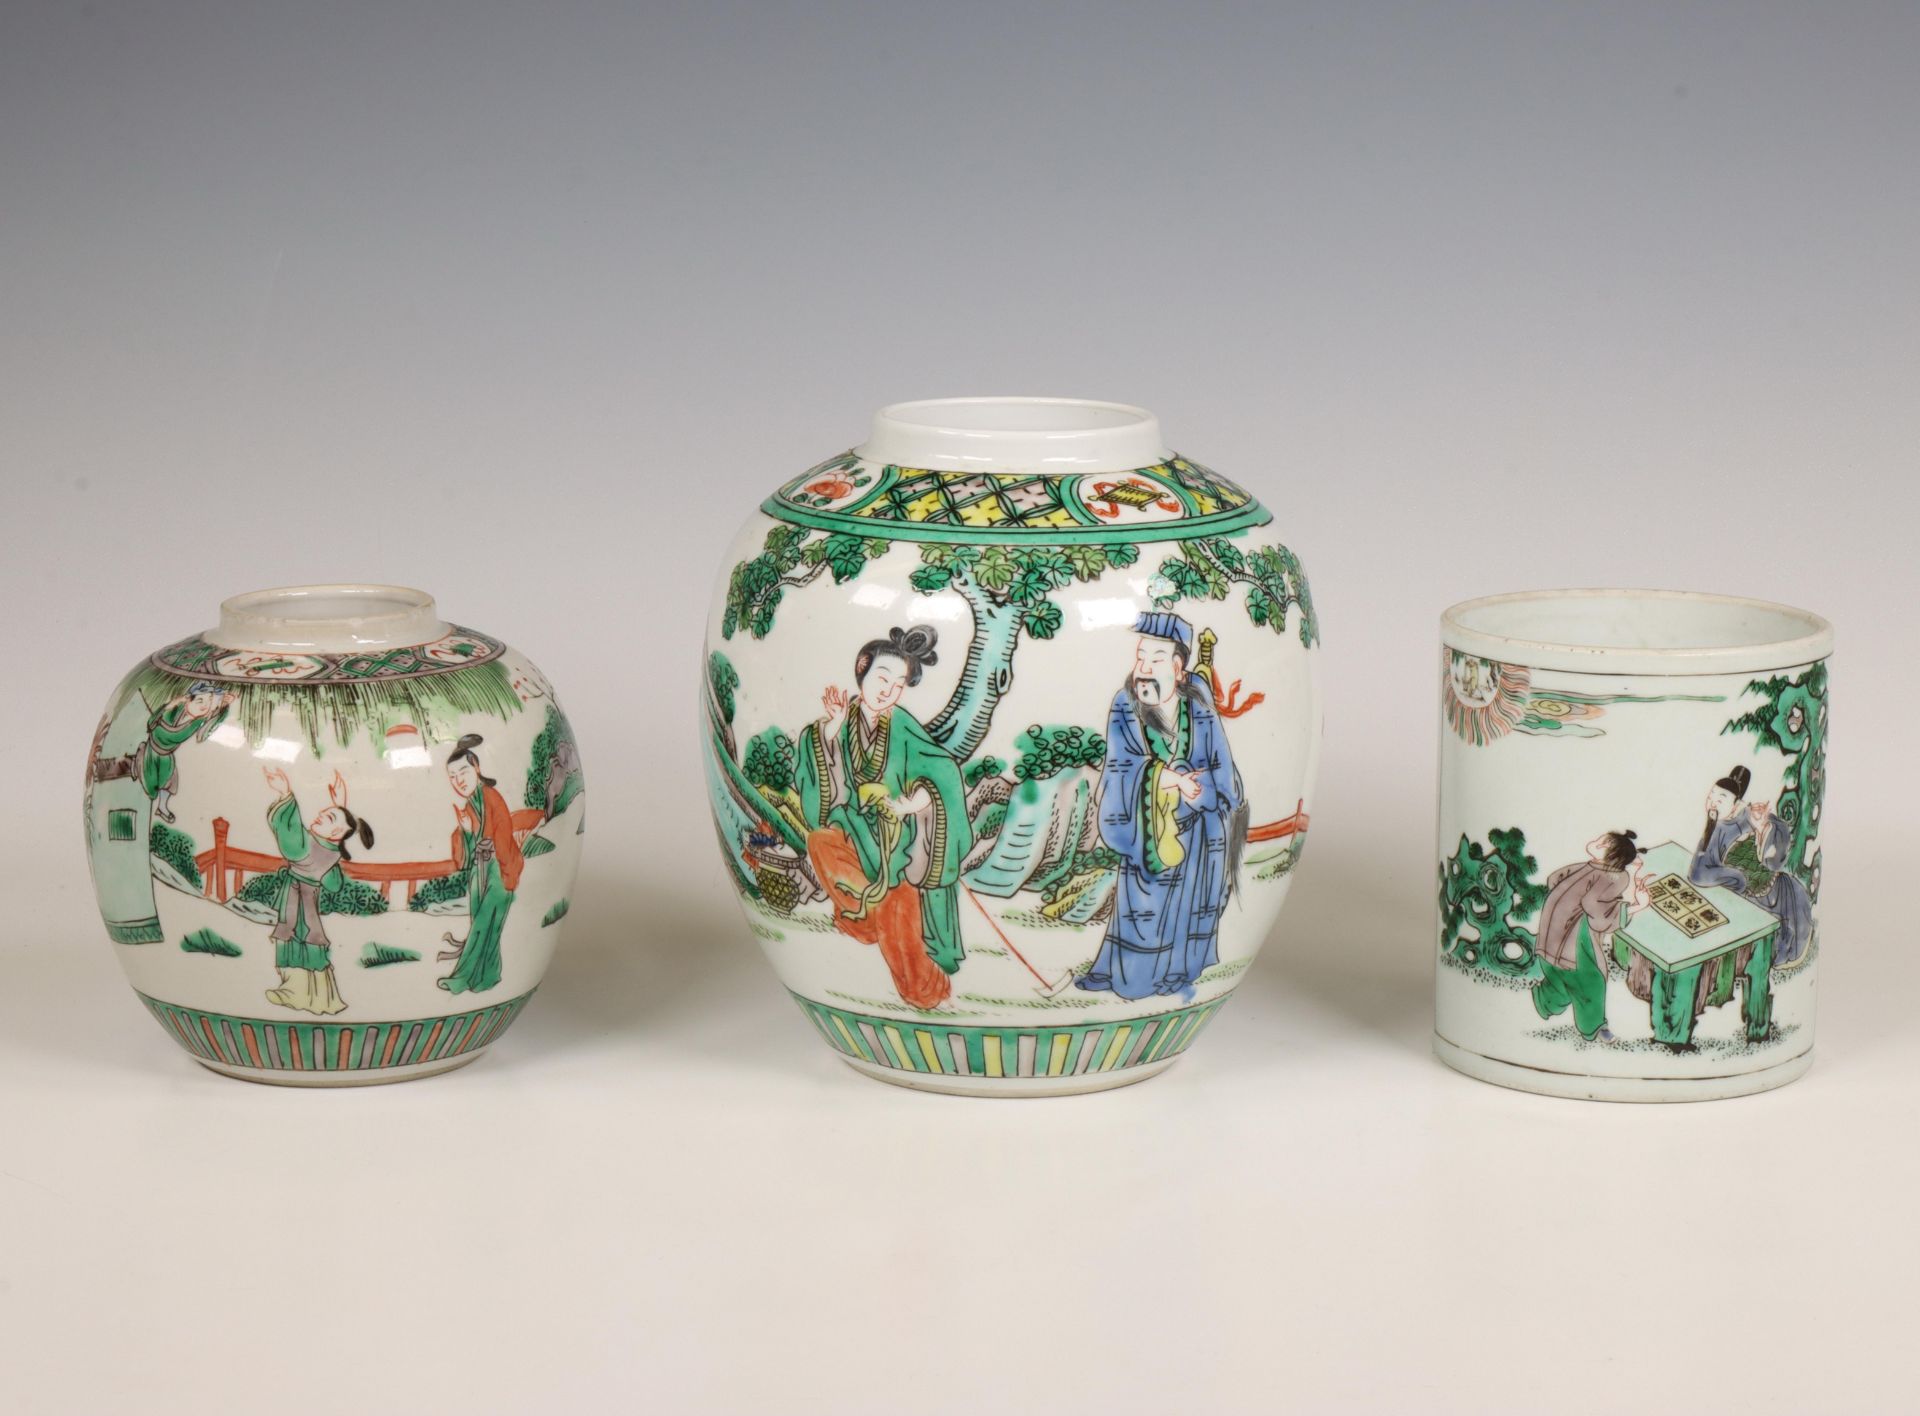 China, three famille rose porcelain objects, 20th century,